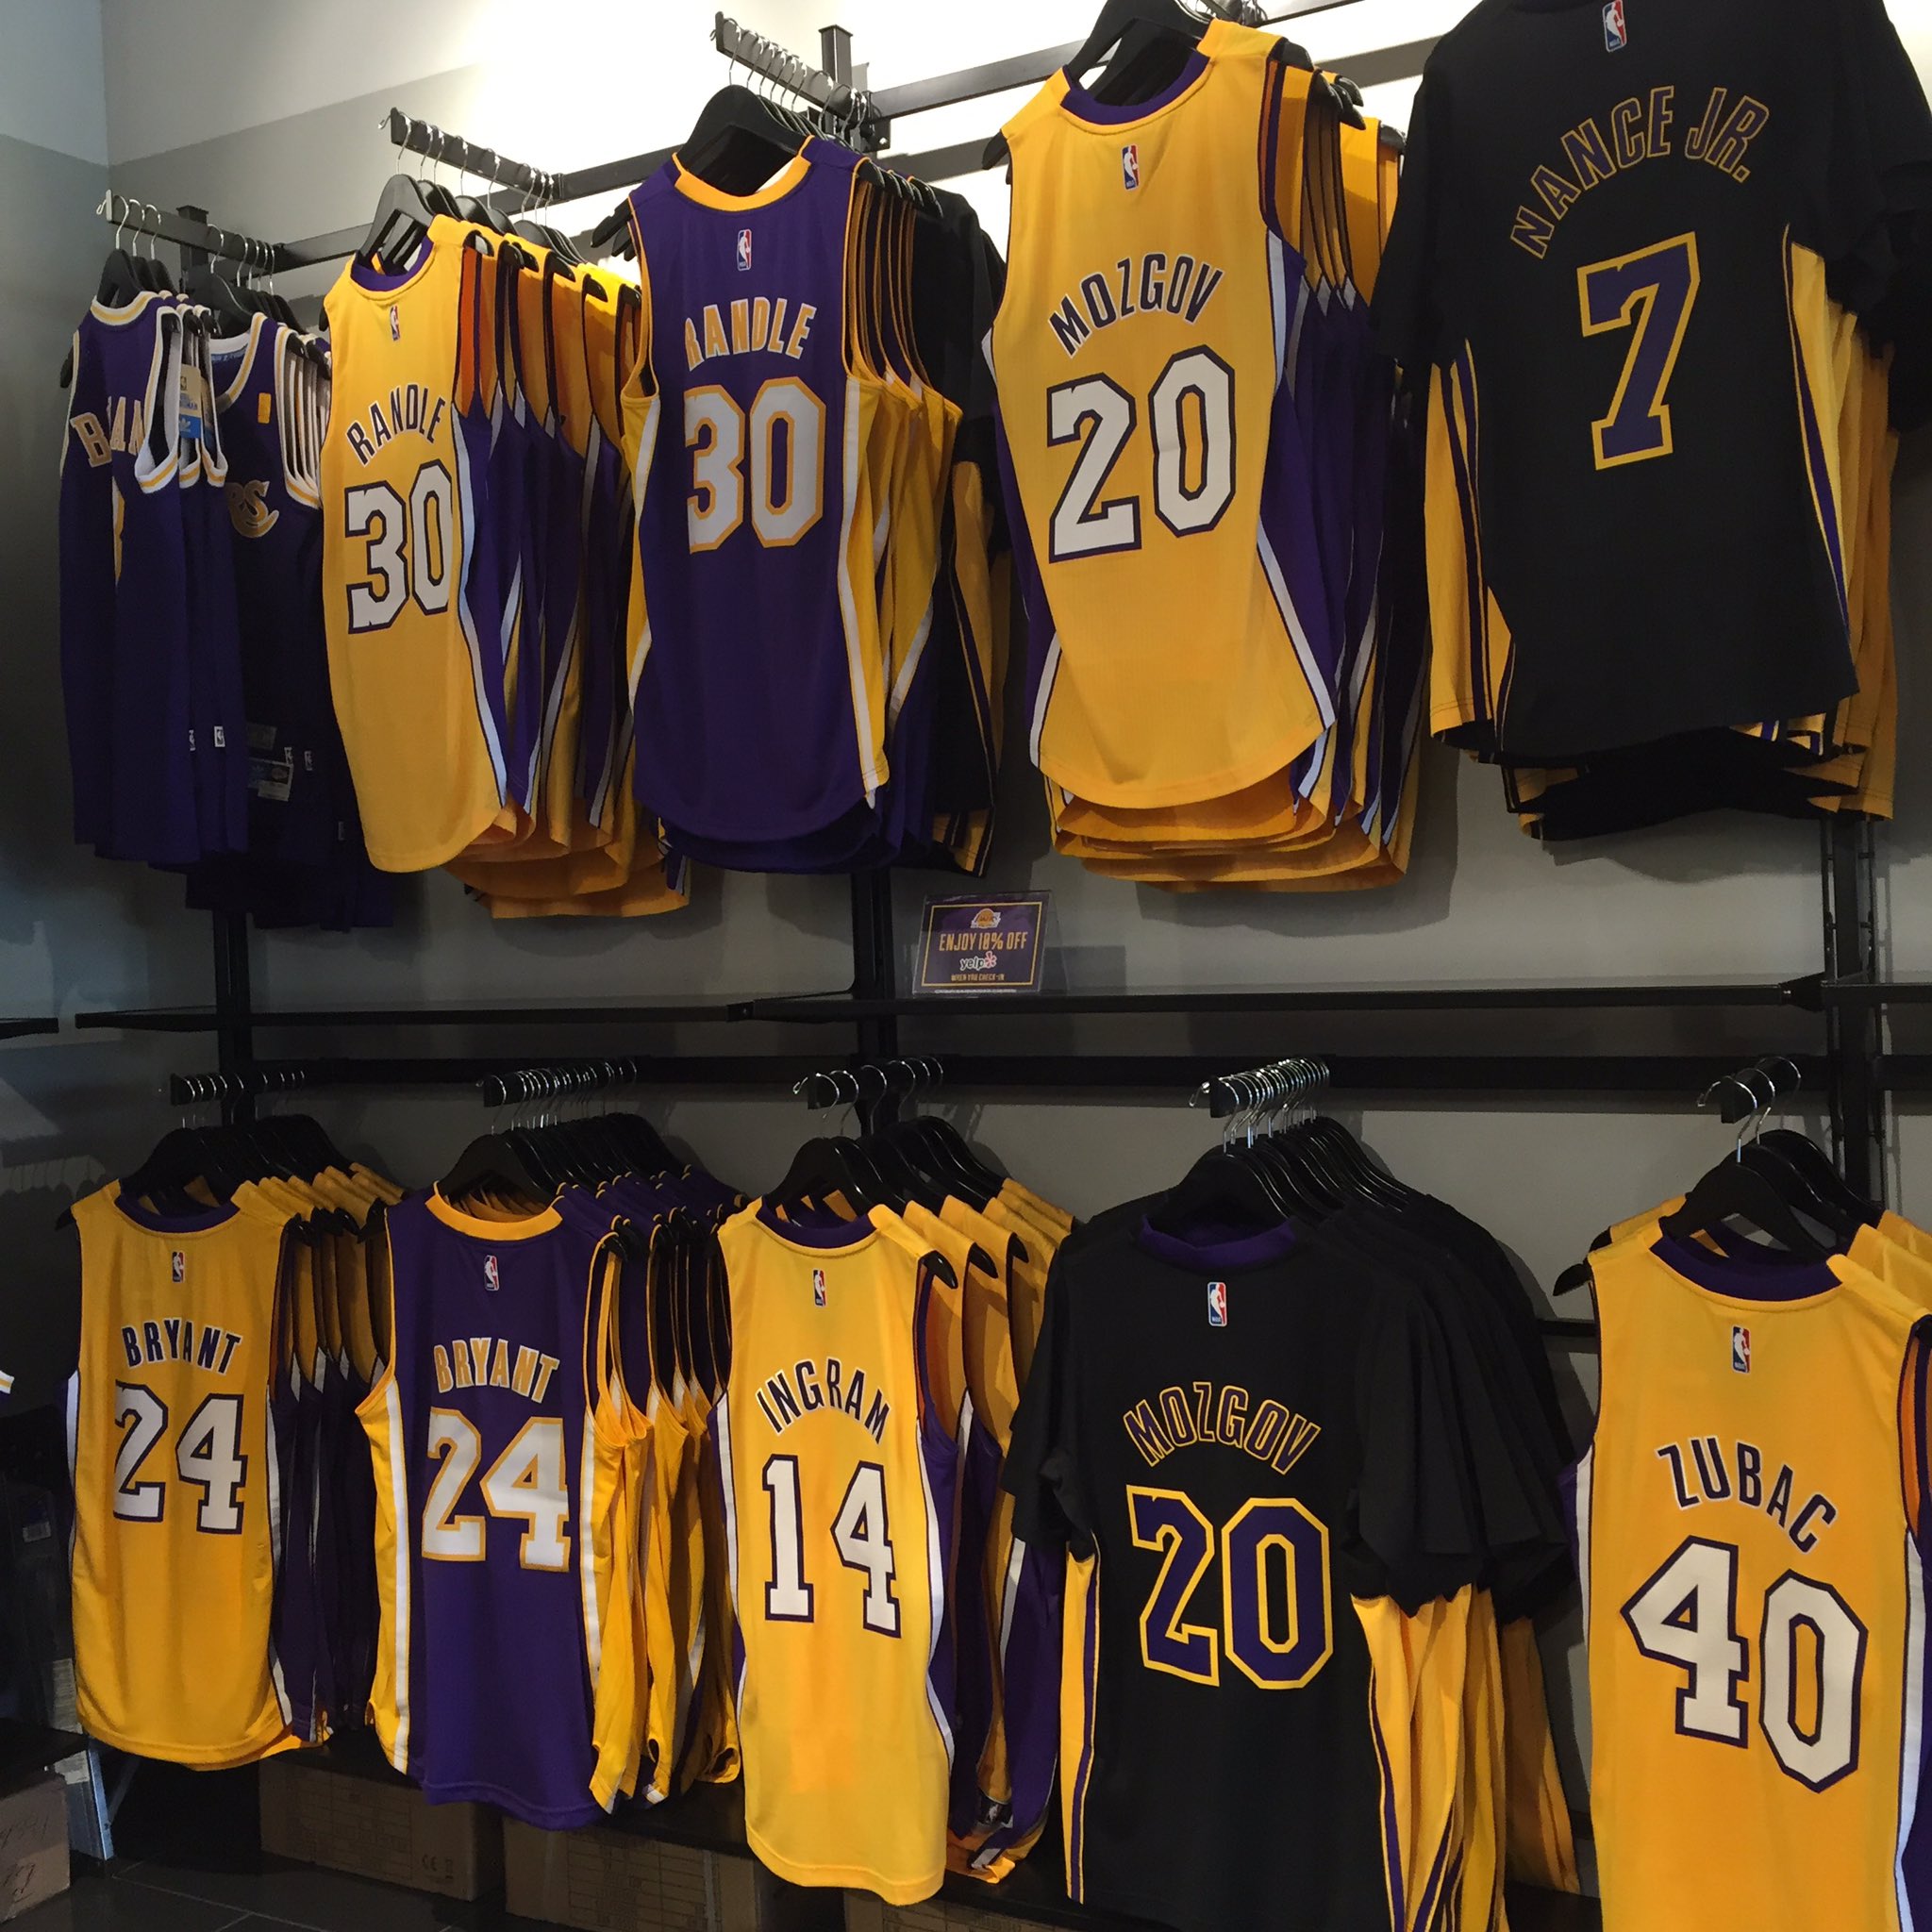 Lakers Store X:ssä: Check out all the awesome gear at the